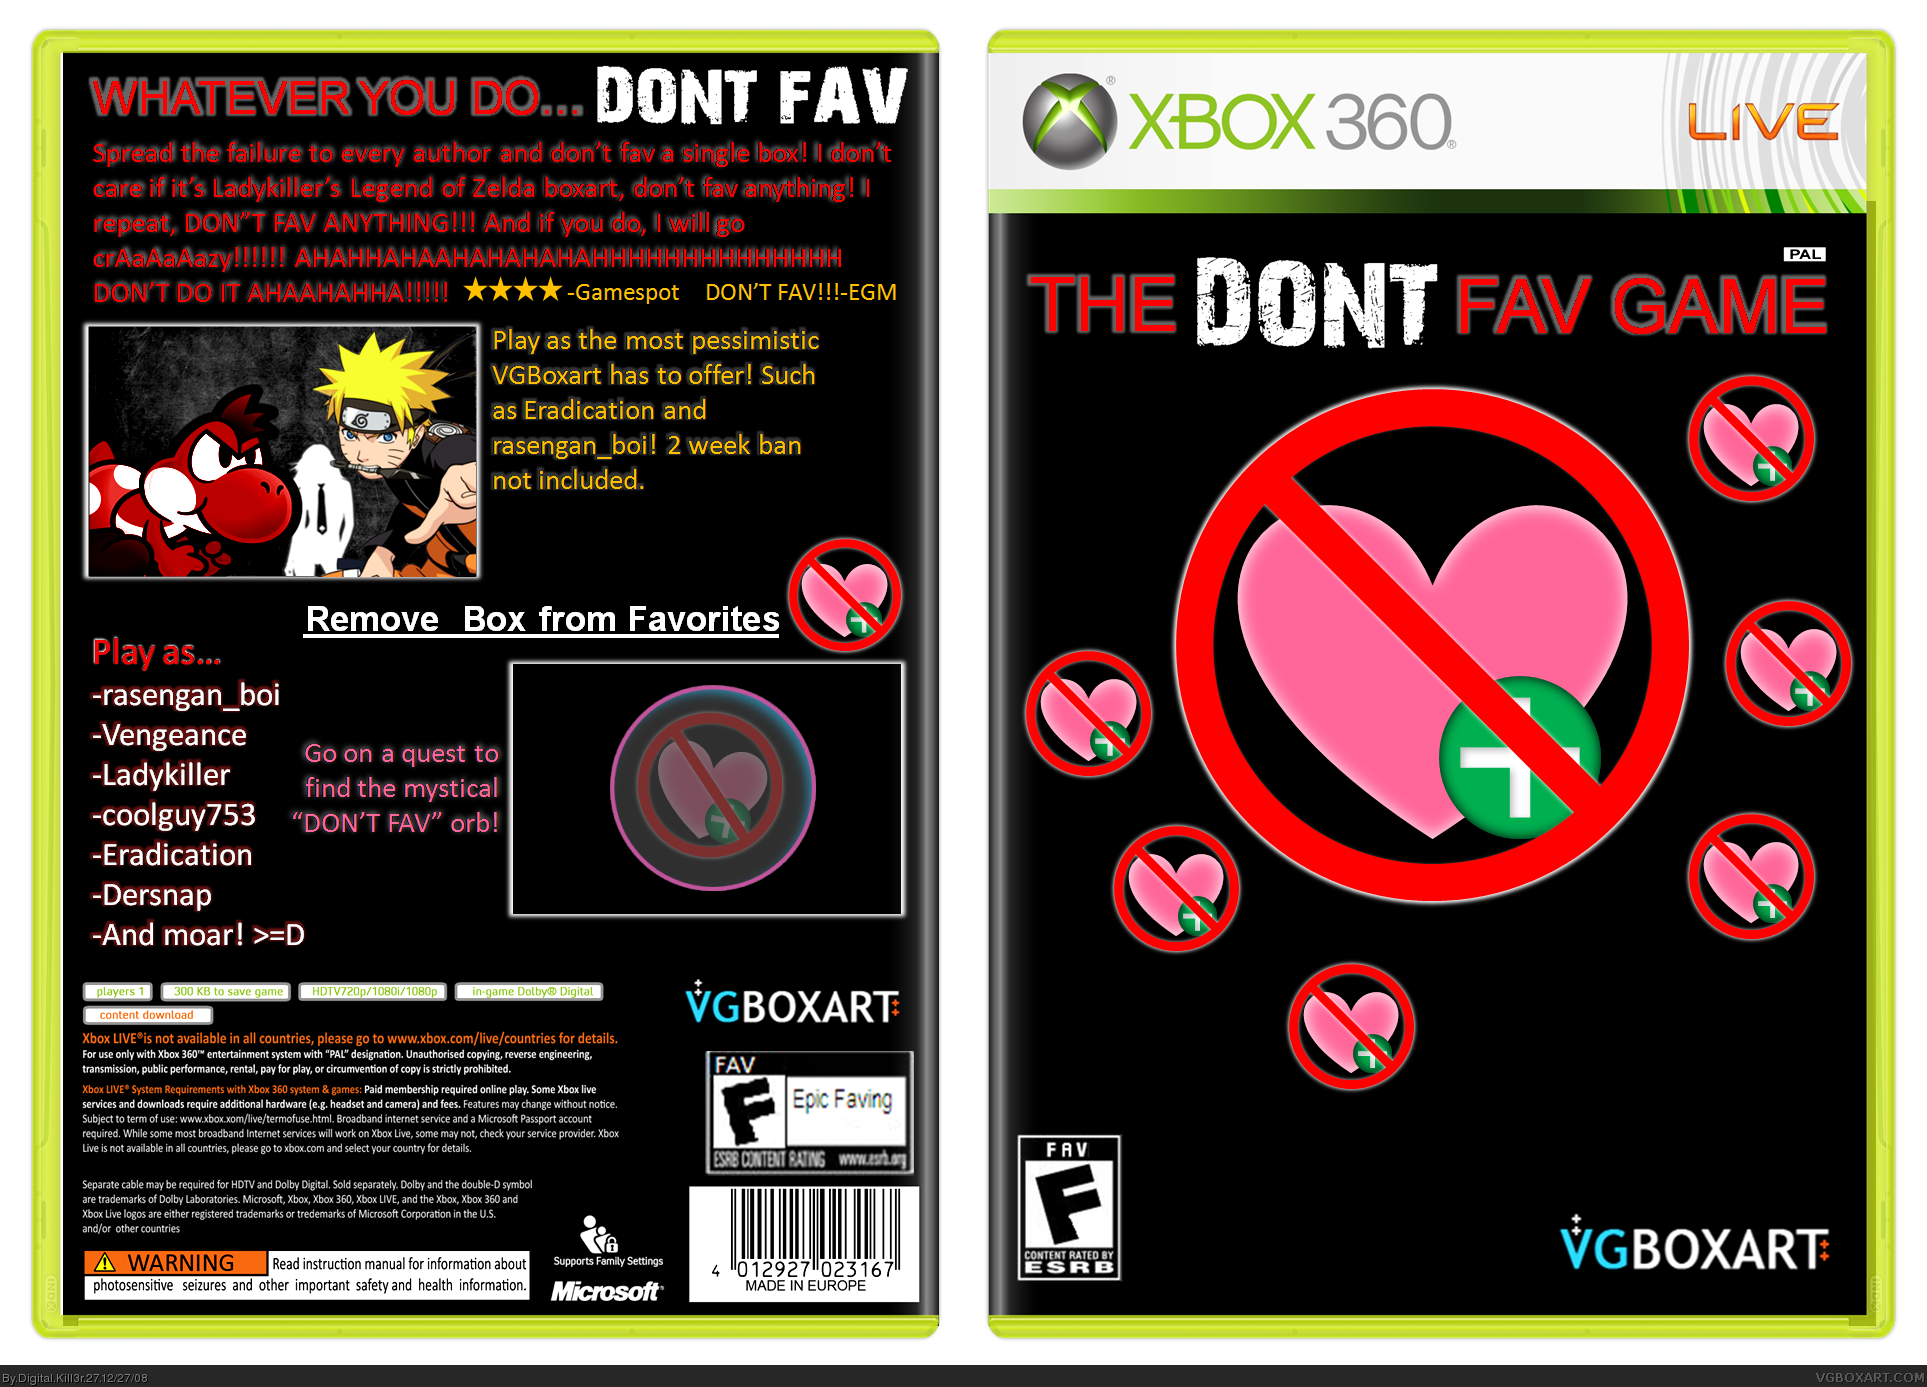 The DON'T Fav Game box cover